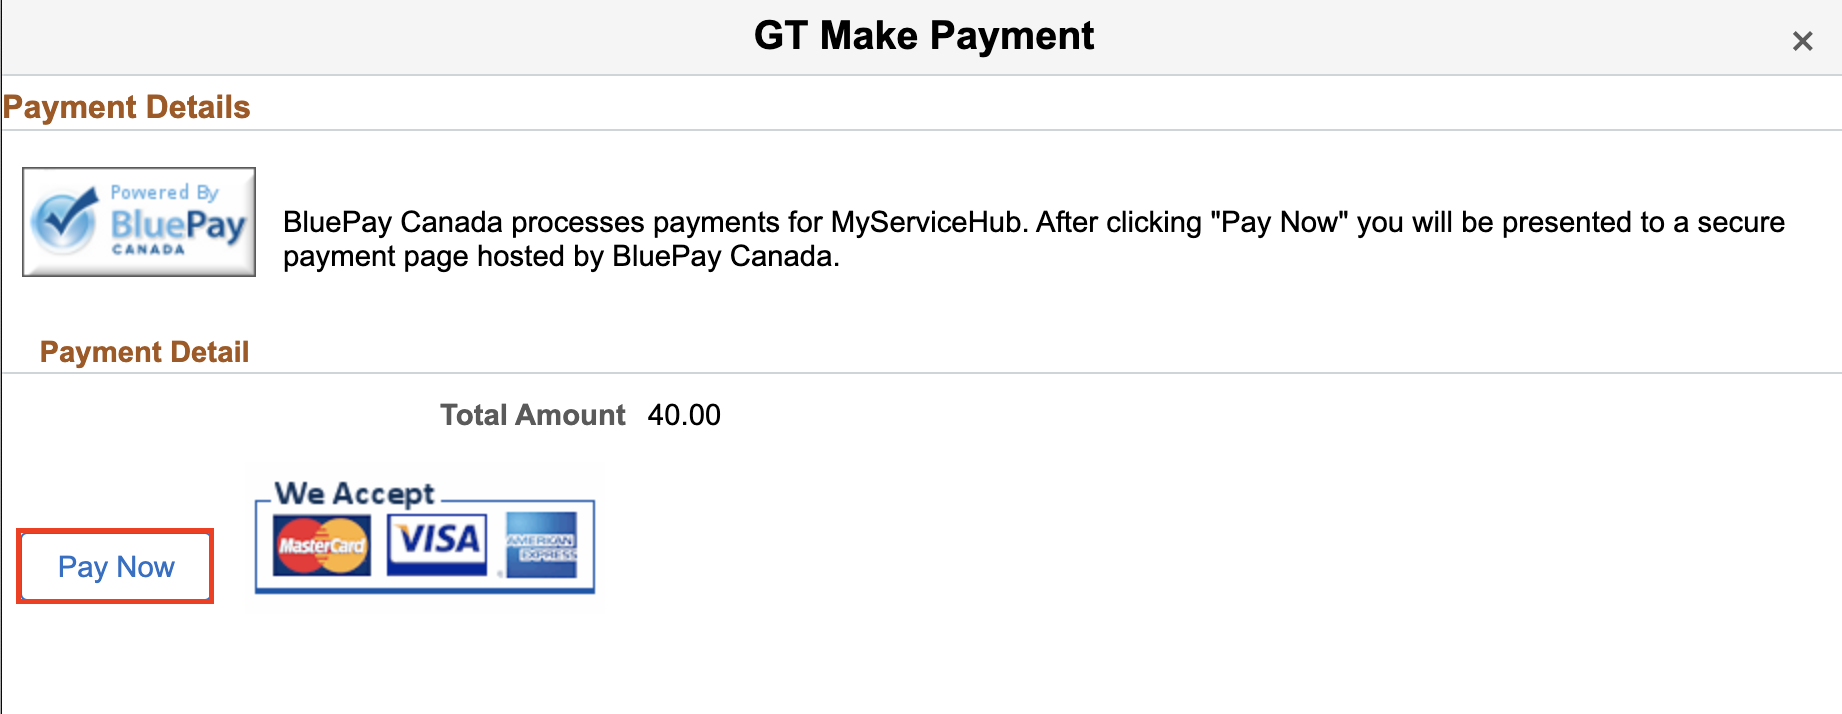 GT Make Payment screen and Pay Now button.